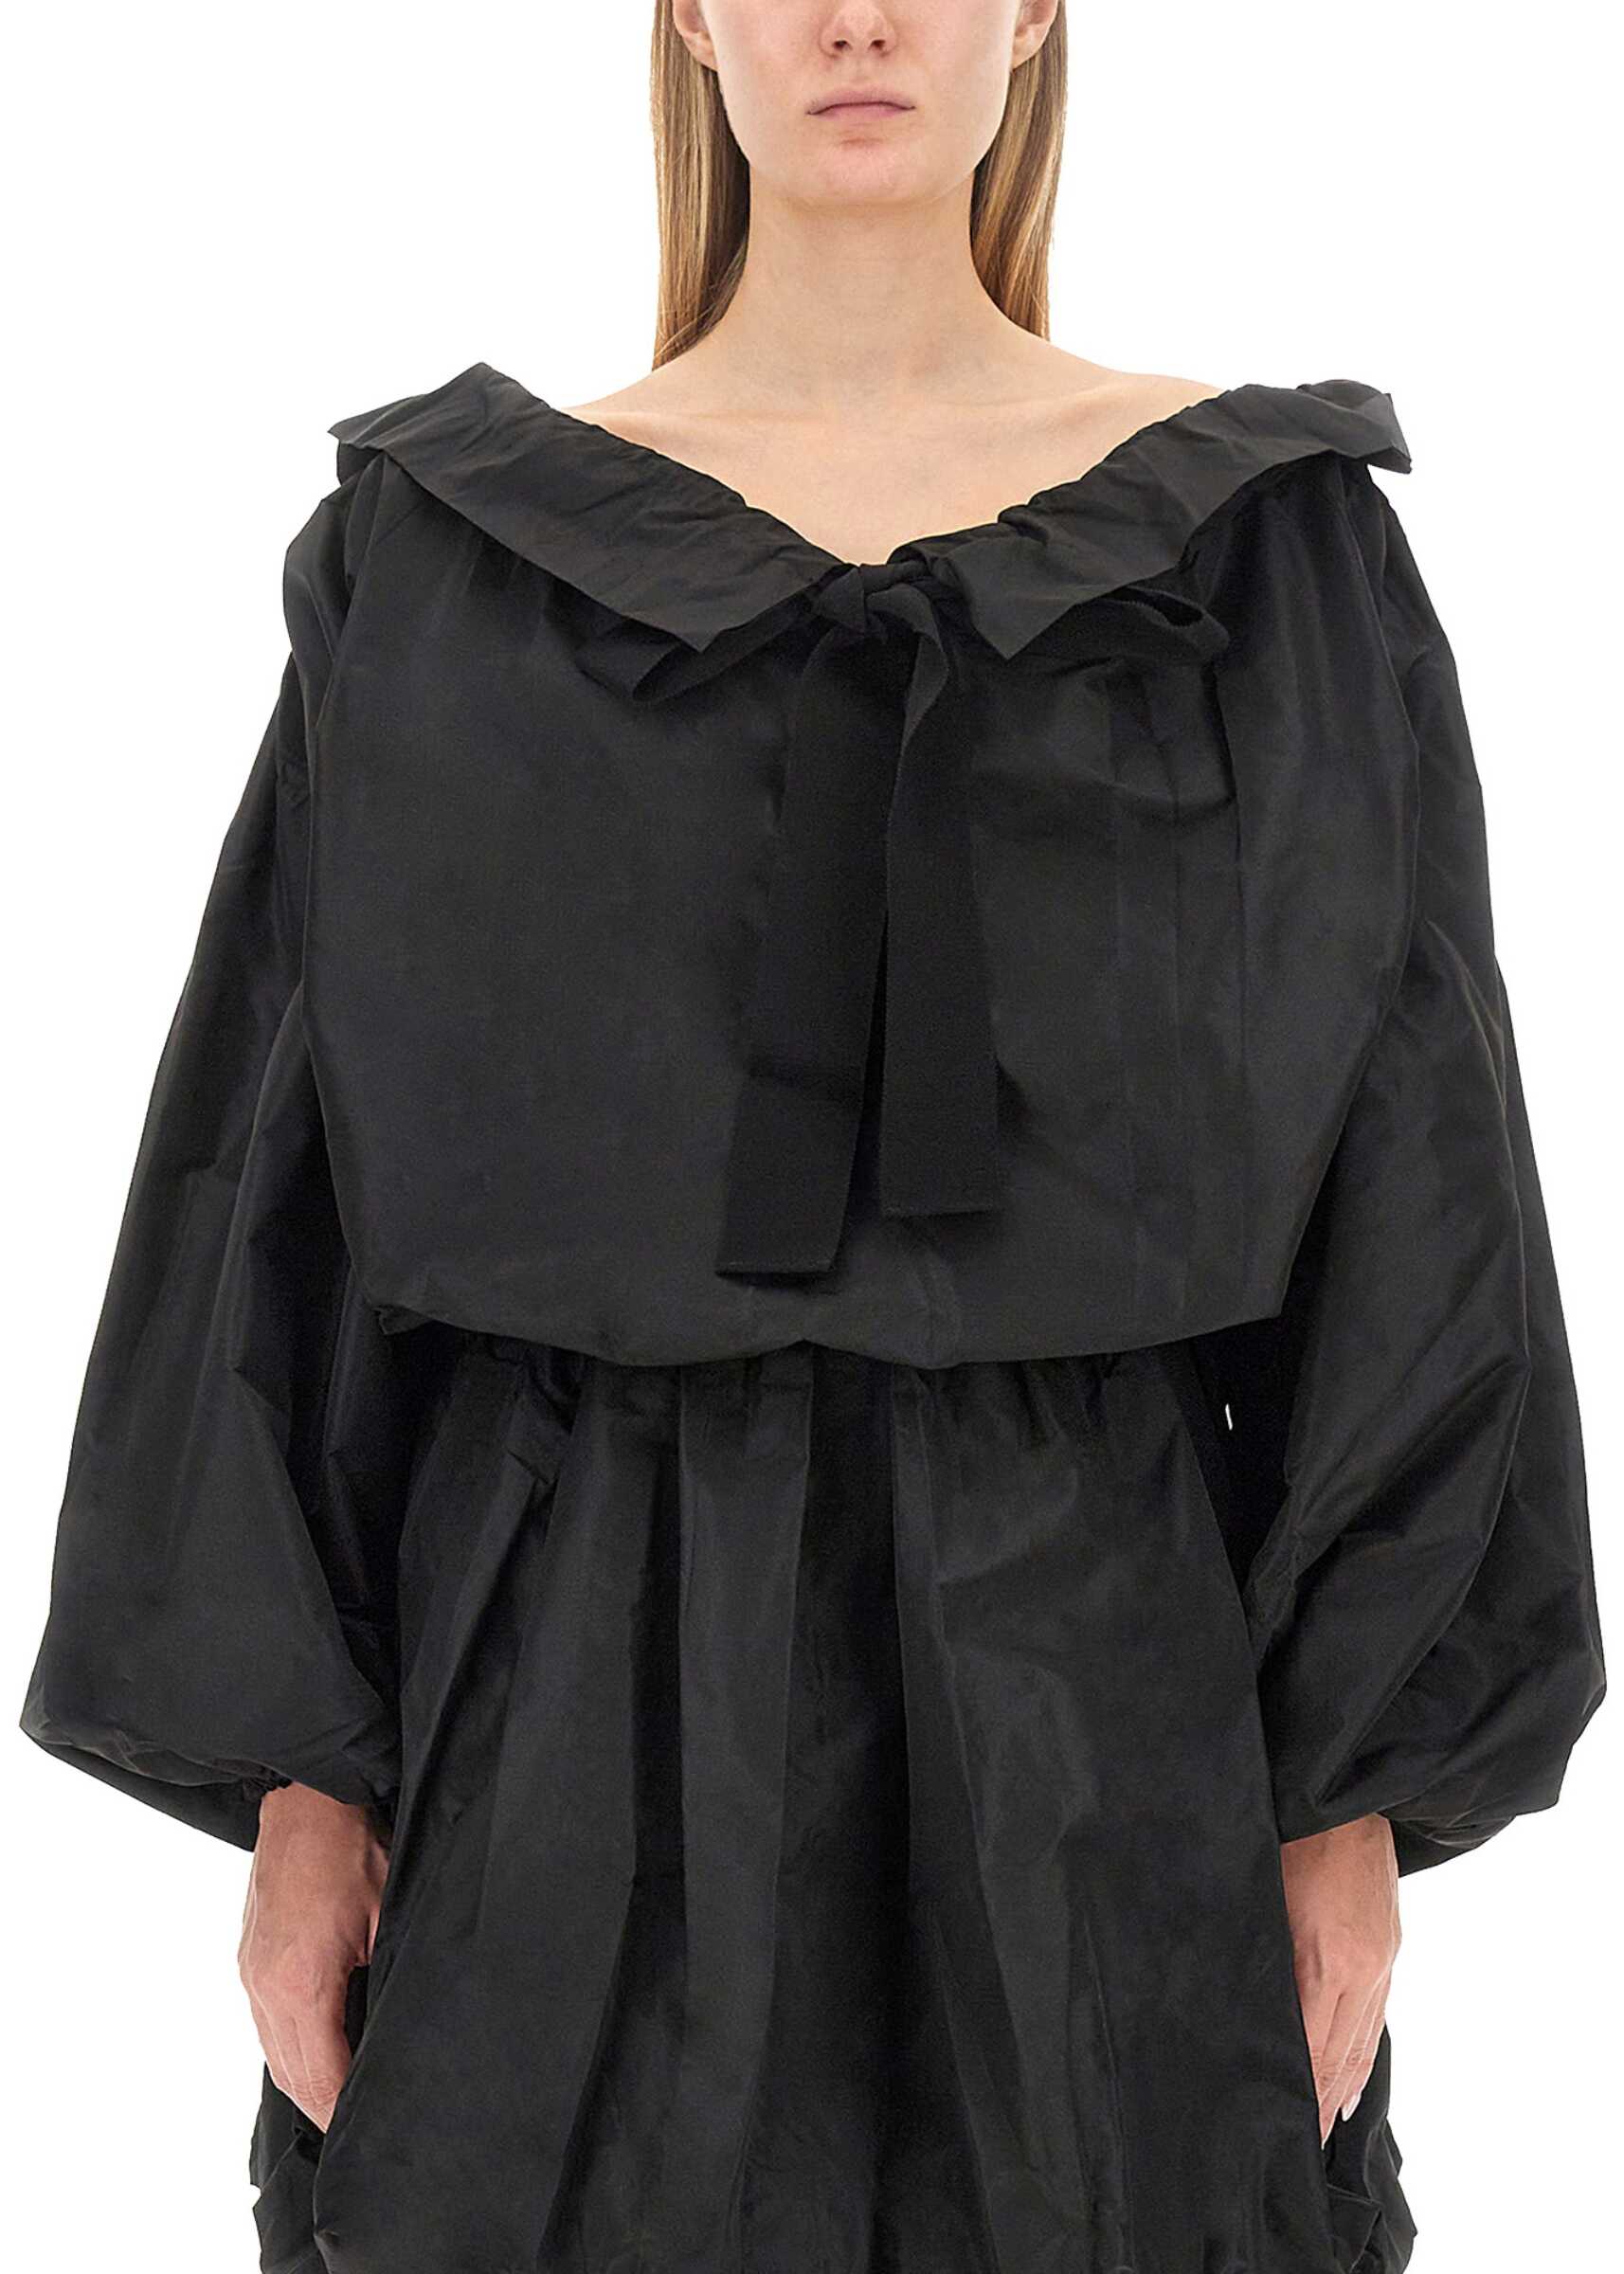 Patou Top With Balloon Sleeves BLACK